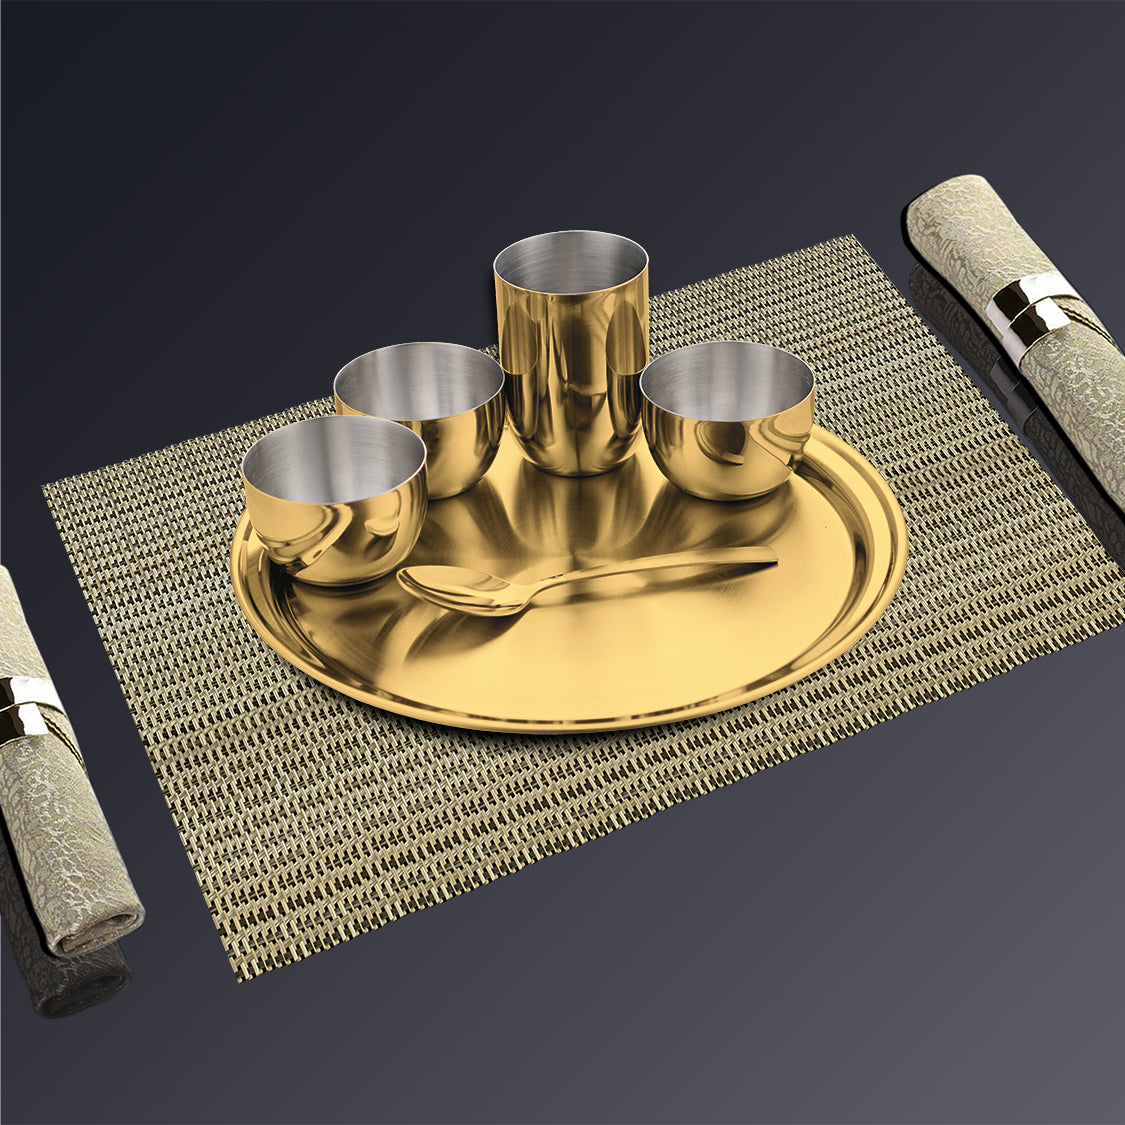 Stainless Steel Thali Set with Gold PVD Coating Majestic